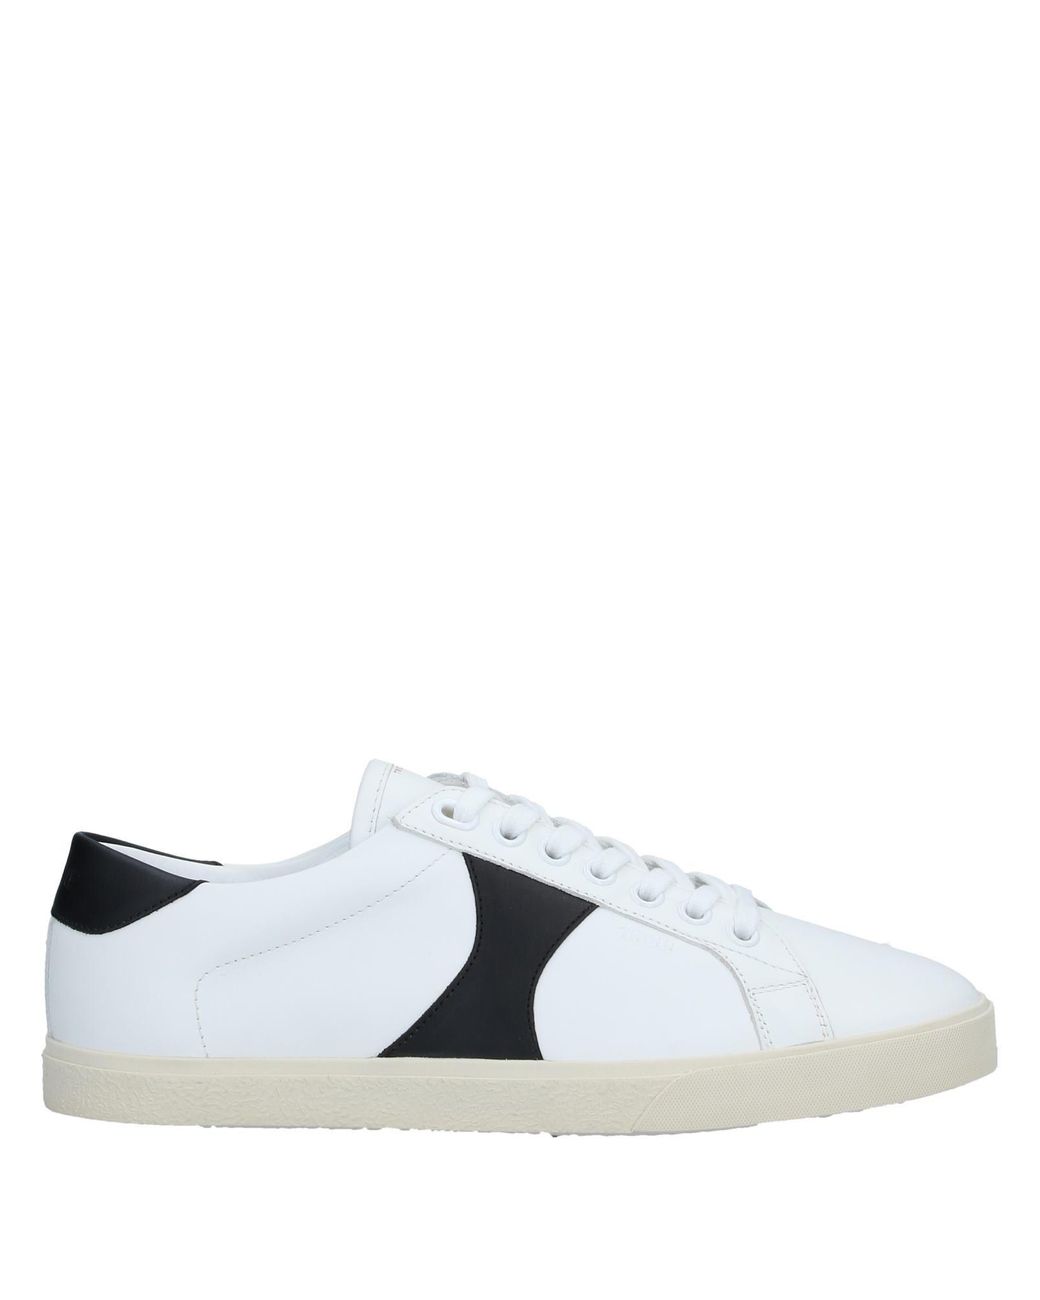 Celine Triomphe Lace-up Leather Sneaker in White | Lyst